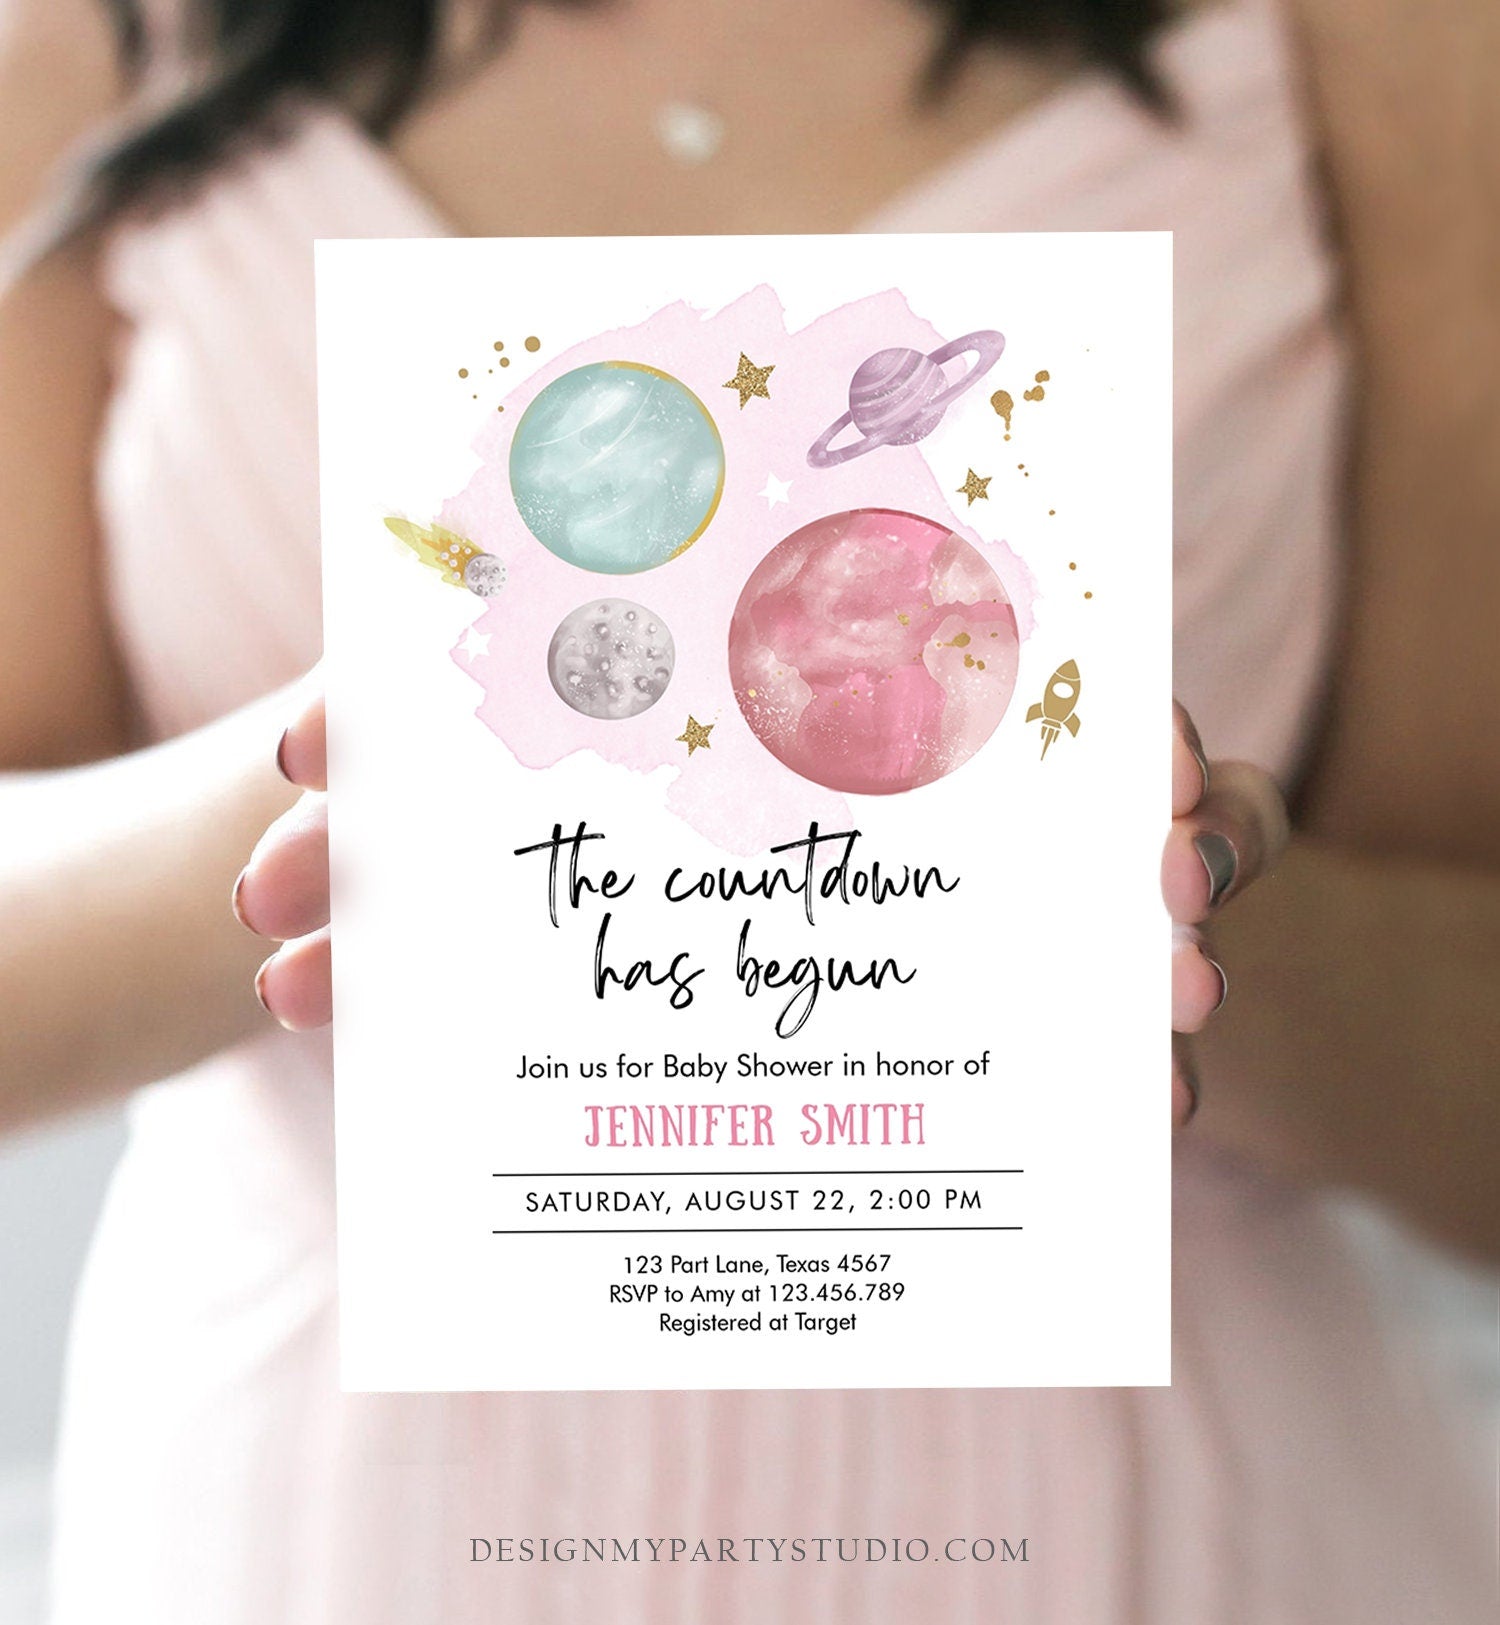 Editable Space Baby Shower Invitation Galaxy Outer Space It's a Girl Pink Planets Moon Countdown Invite Template Instant Download Corjl 0357